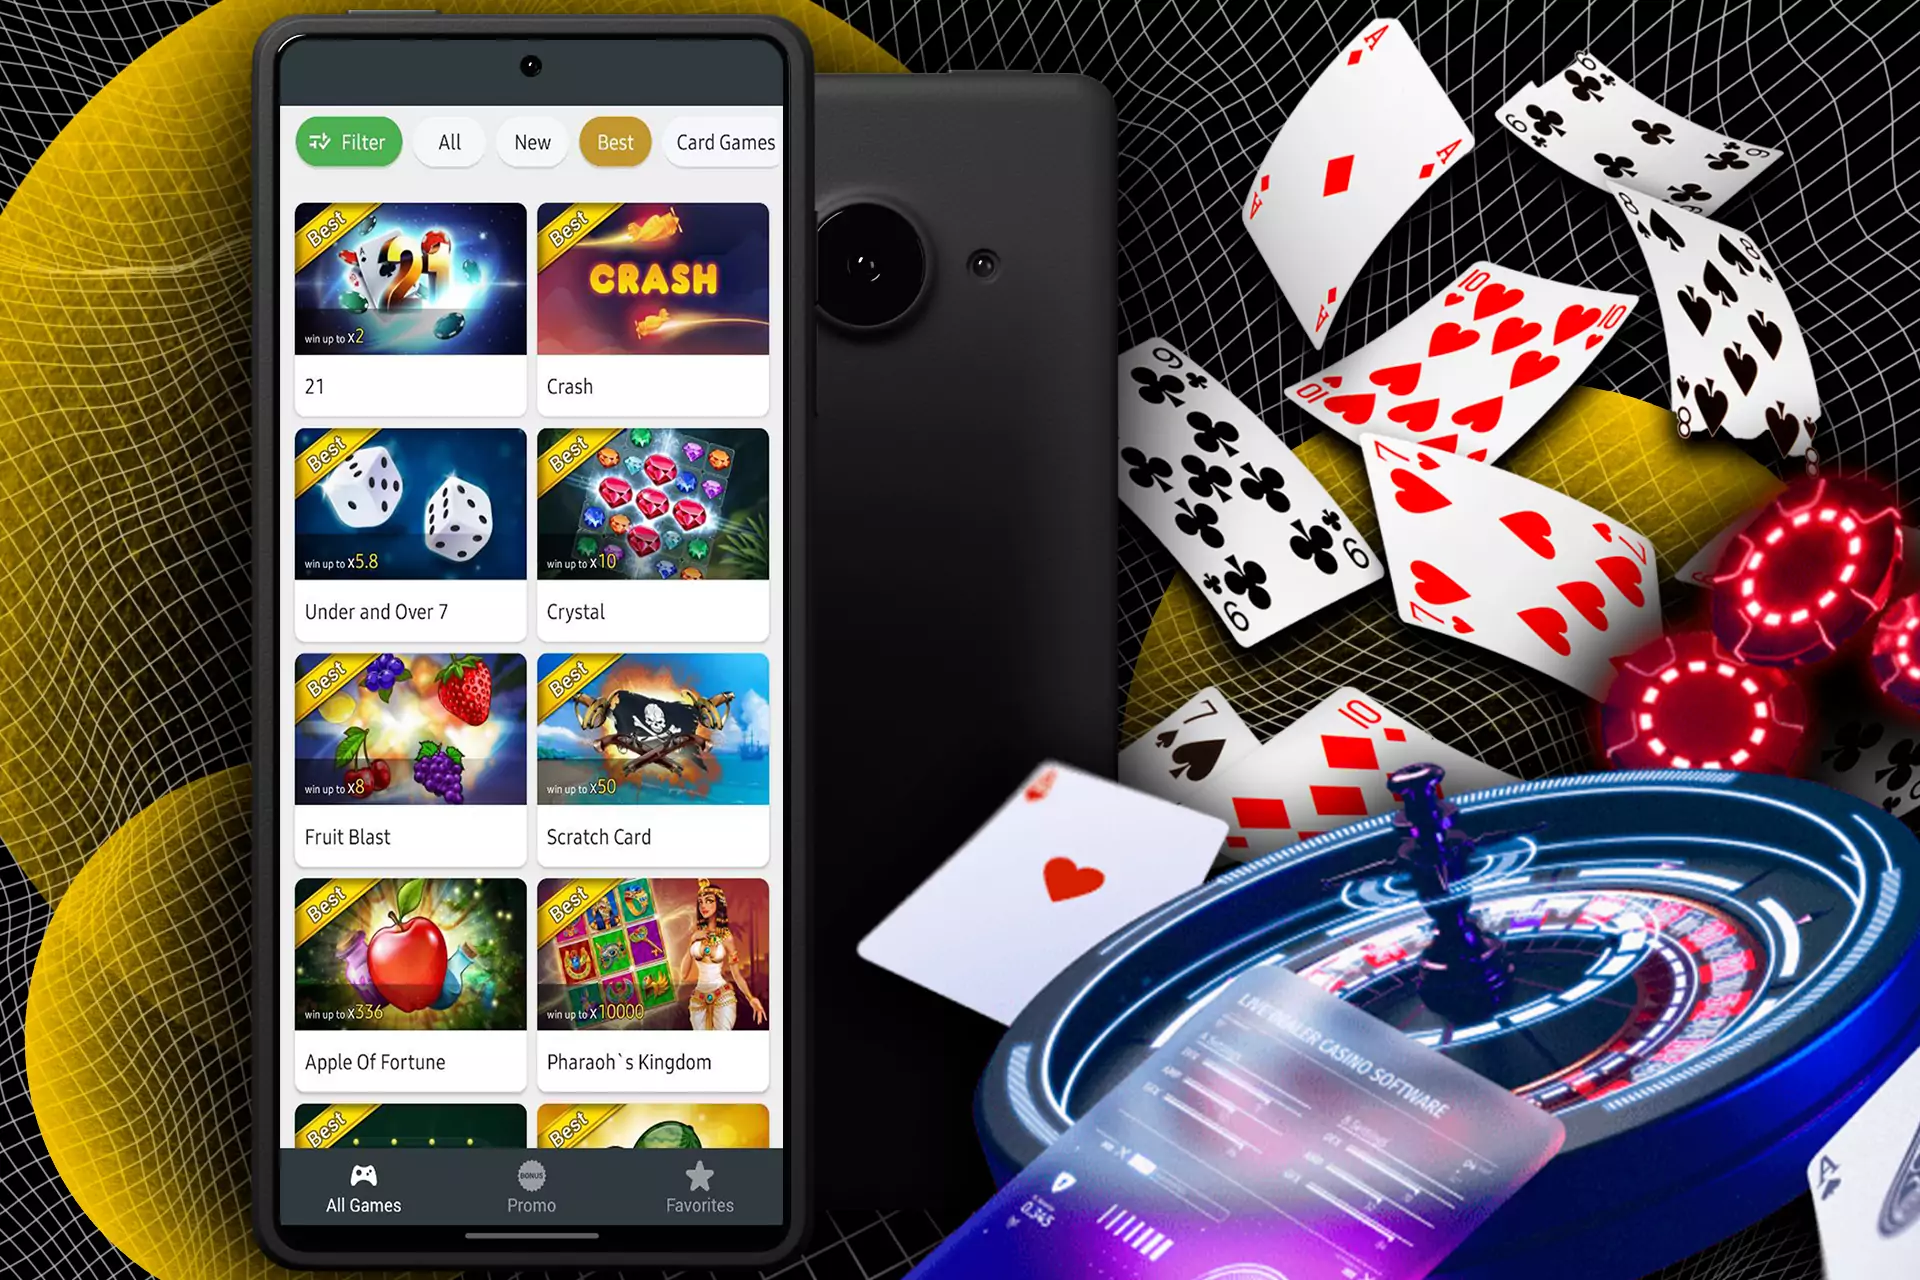 Download and install the Melbet app for Android to play using your smartphone.